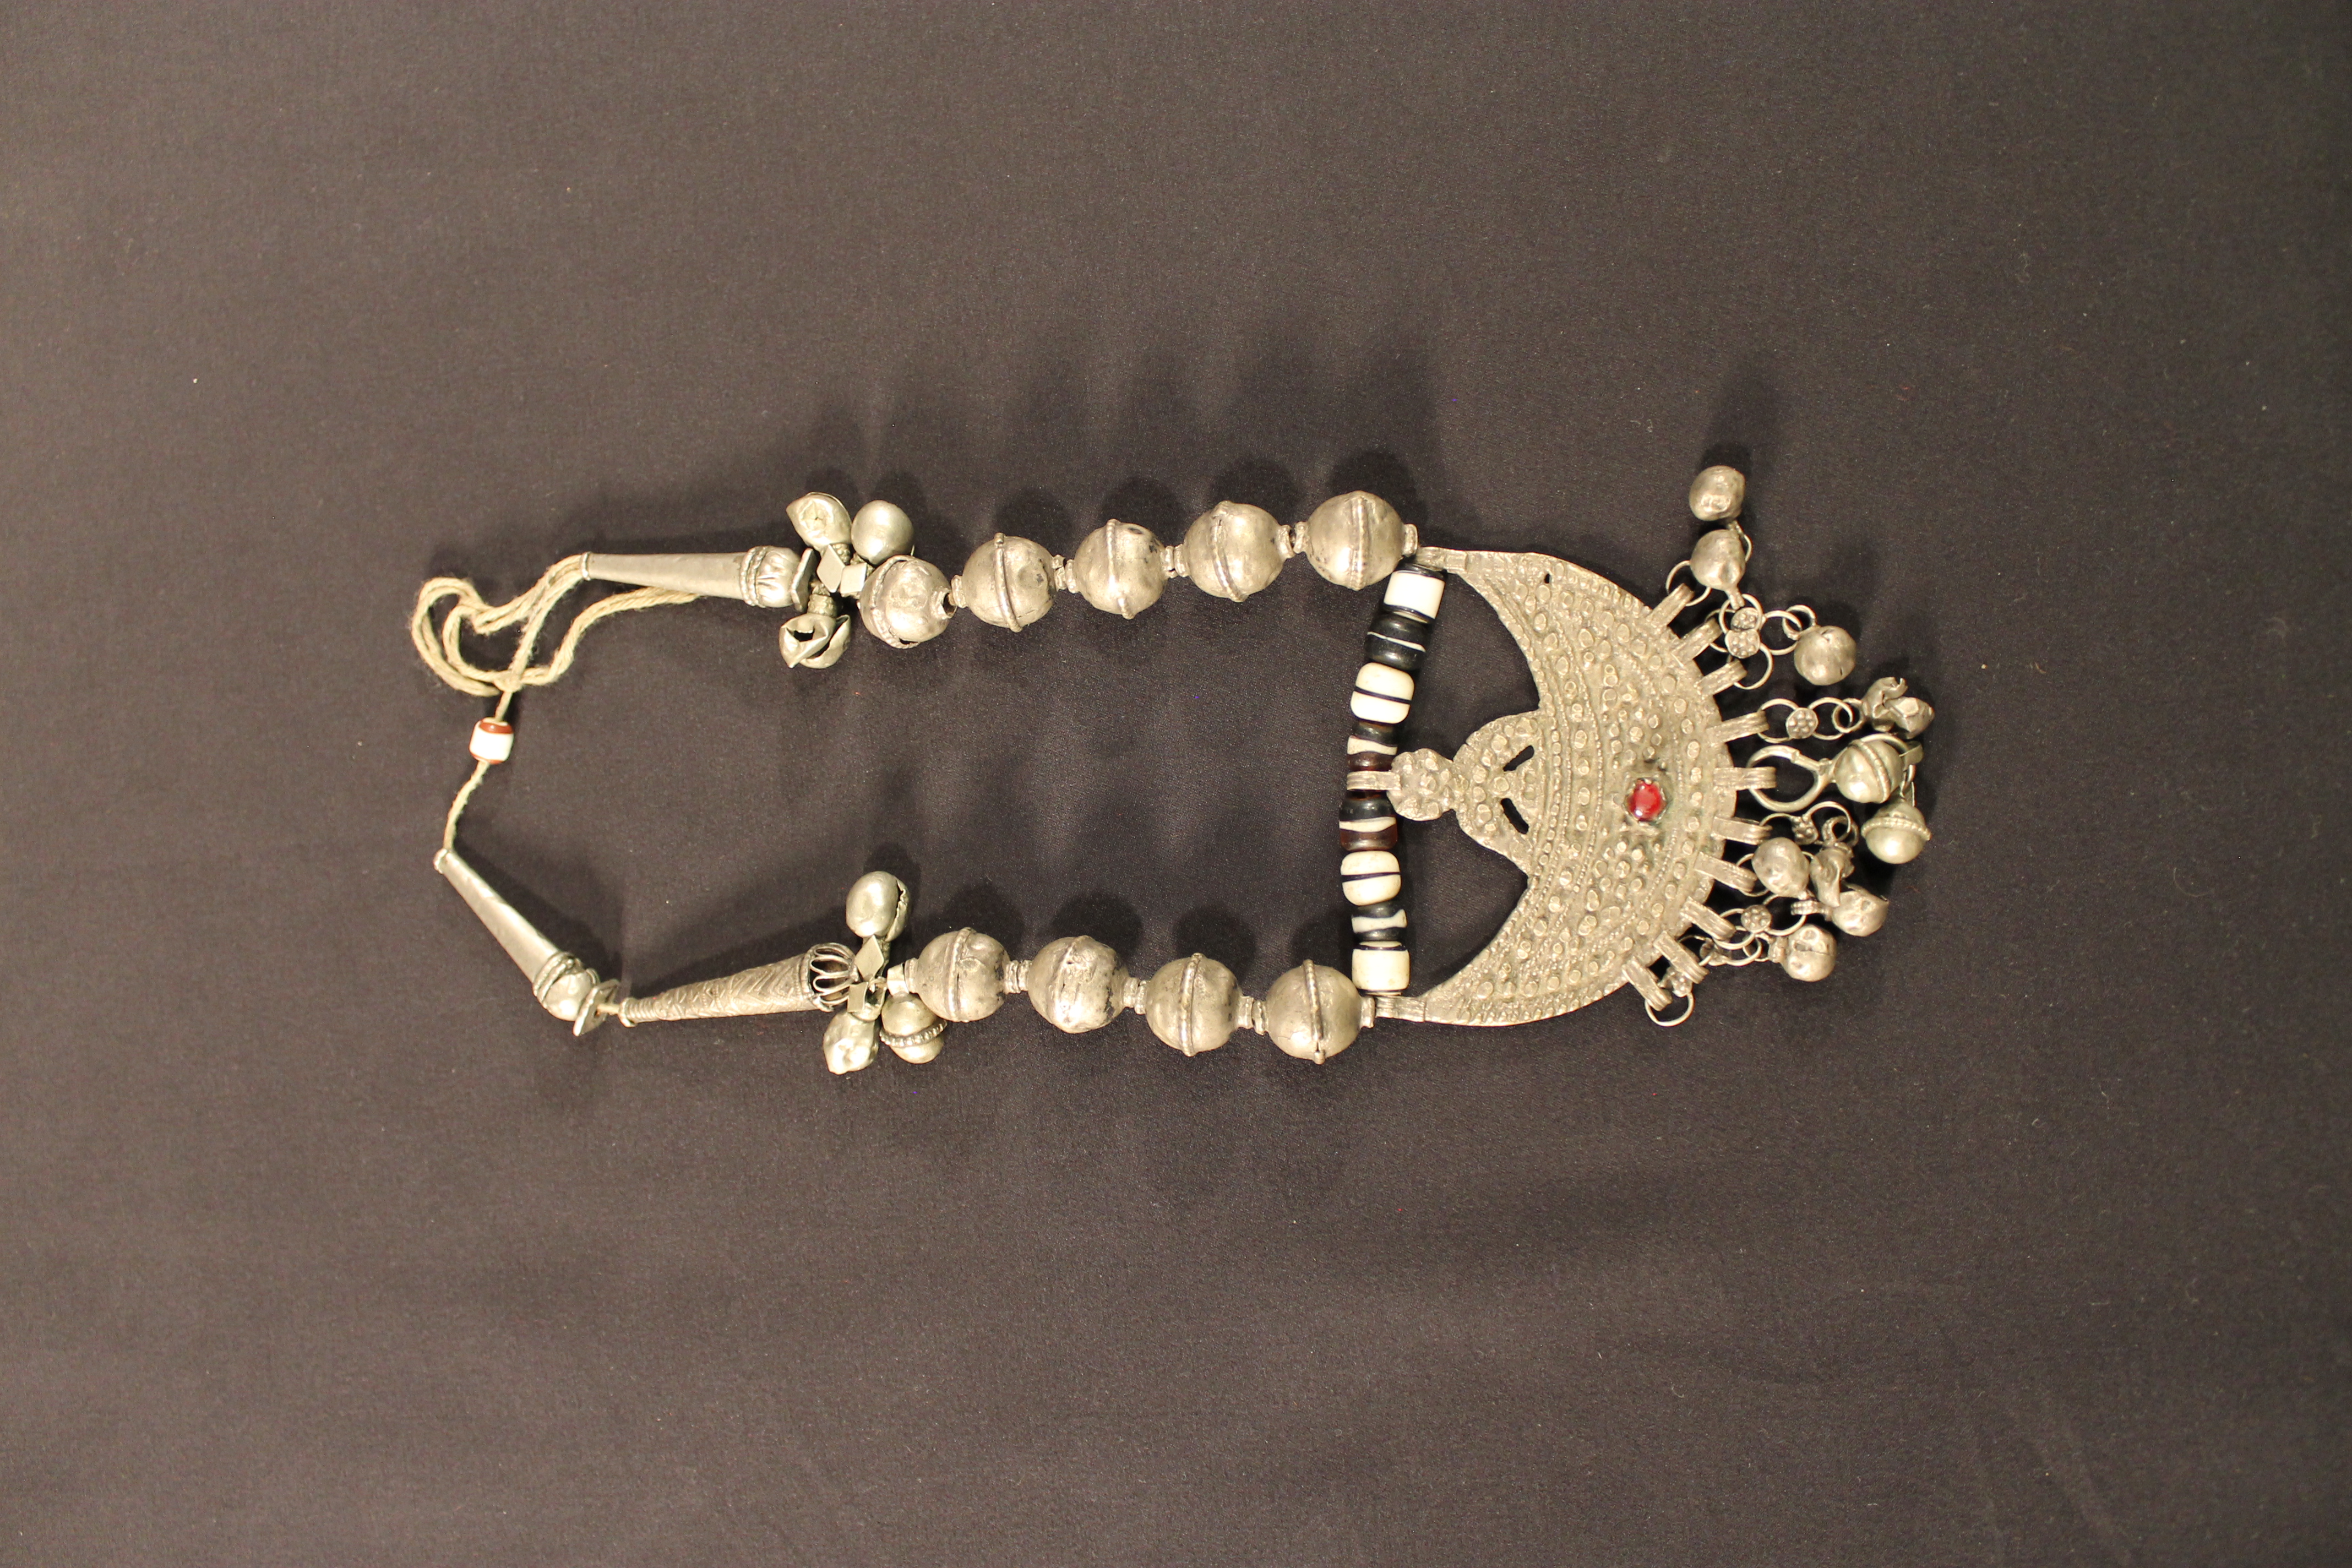 A silver multi-shaped necklace has a crescent pendant with a red gem embedded in the center with bells on either side.